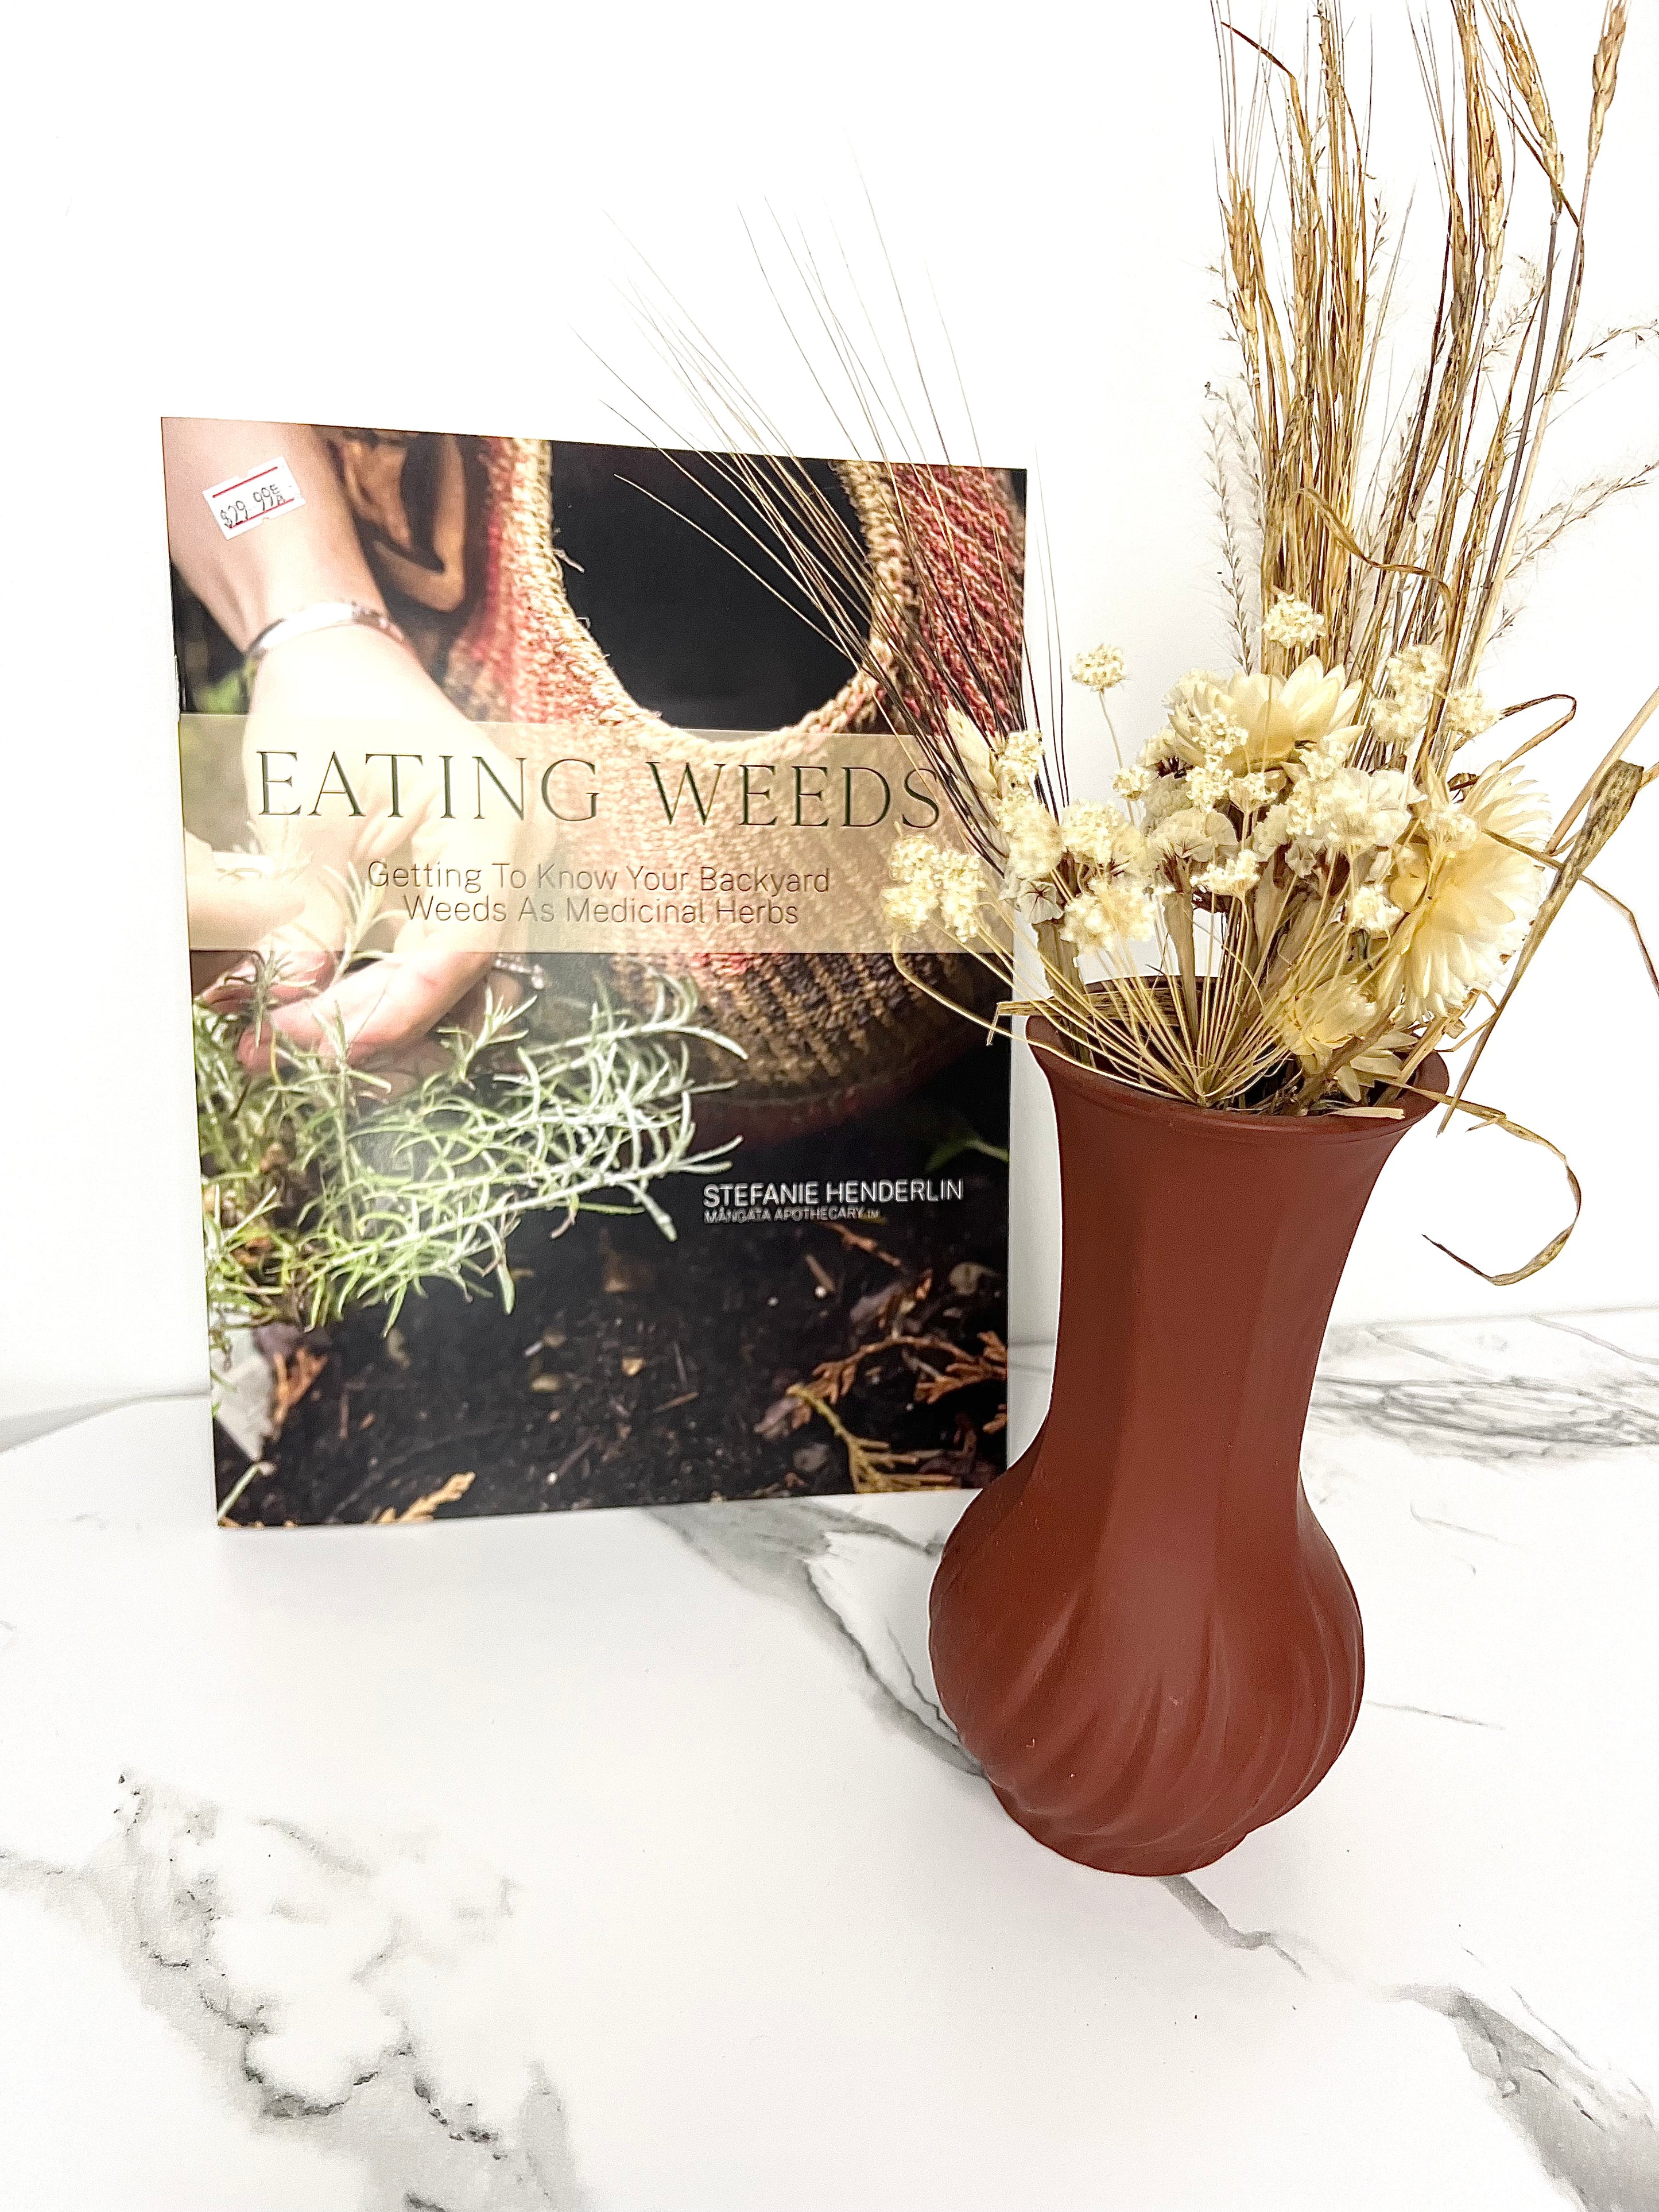 Cooking with herbs - Product Image For Eating Weeds Book